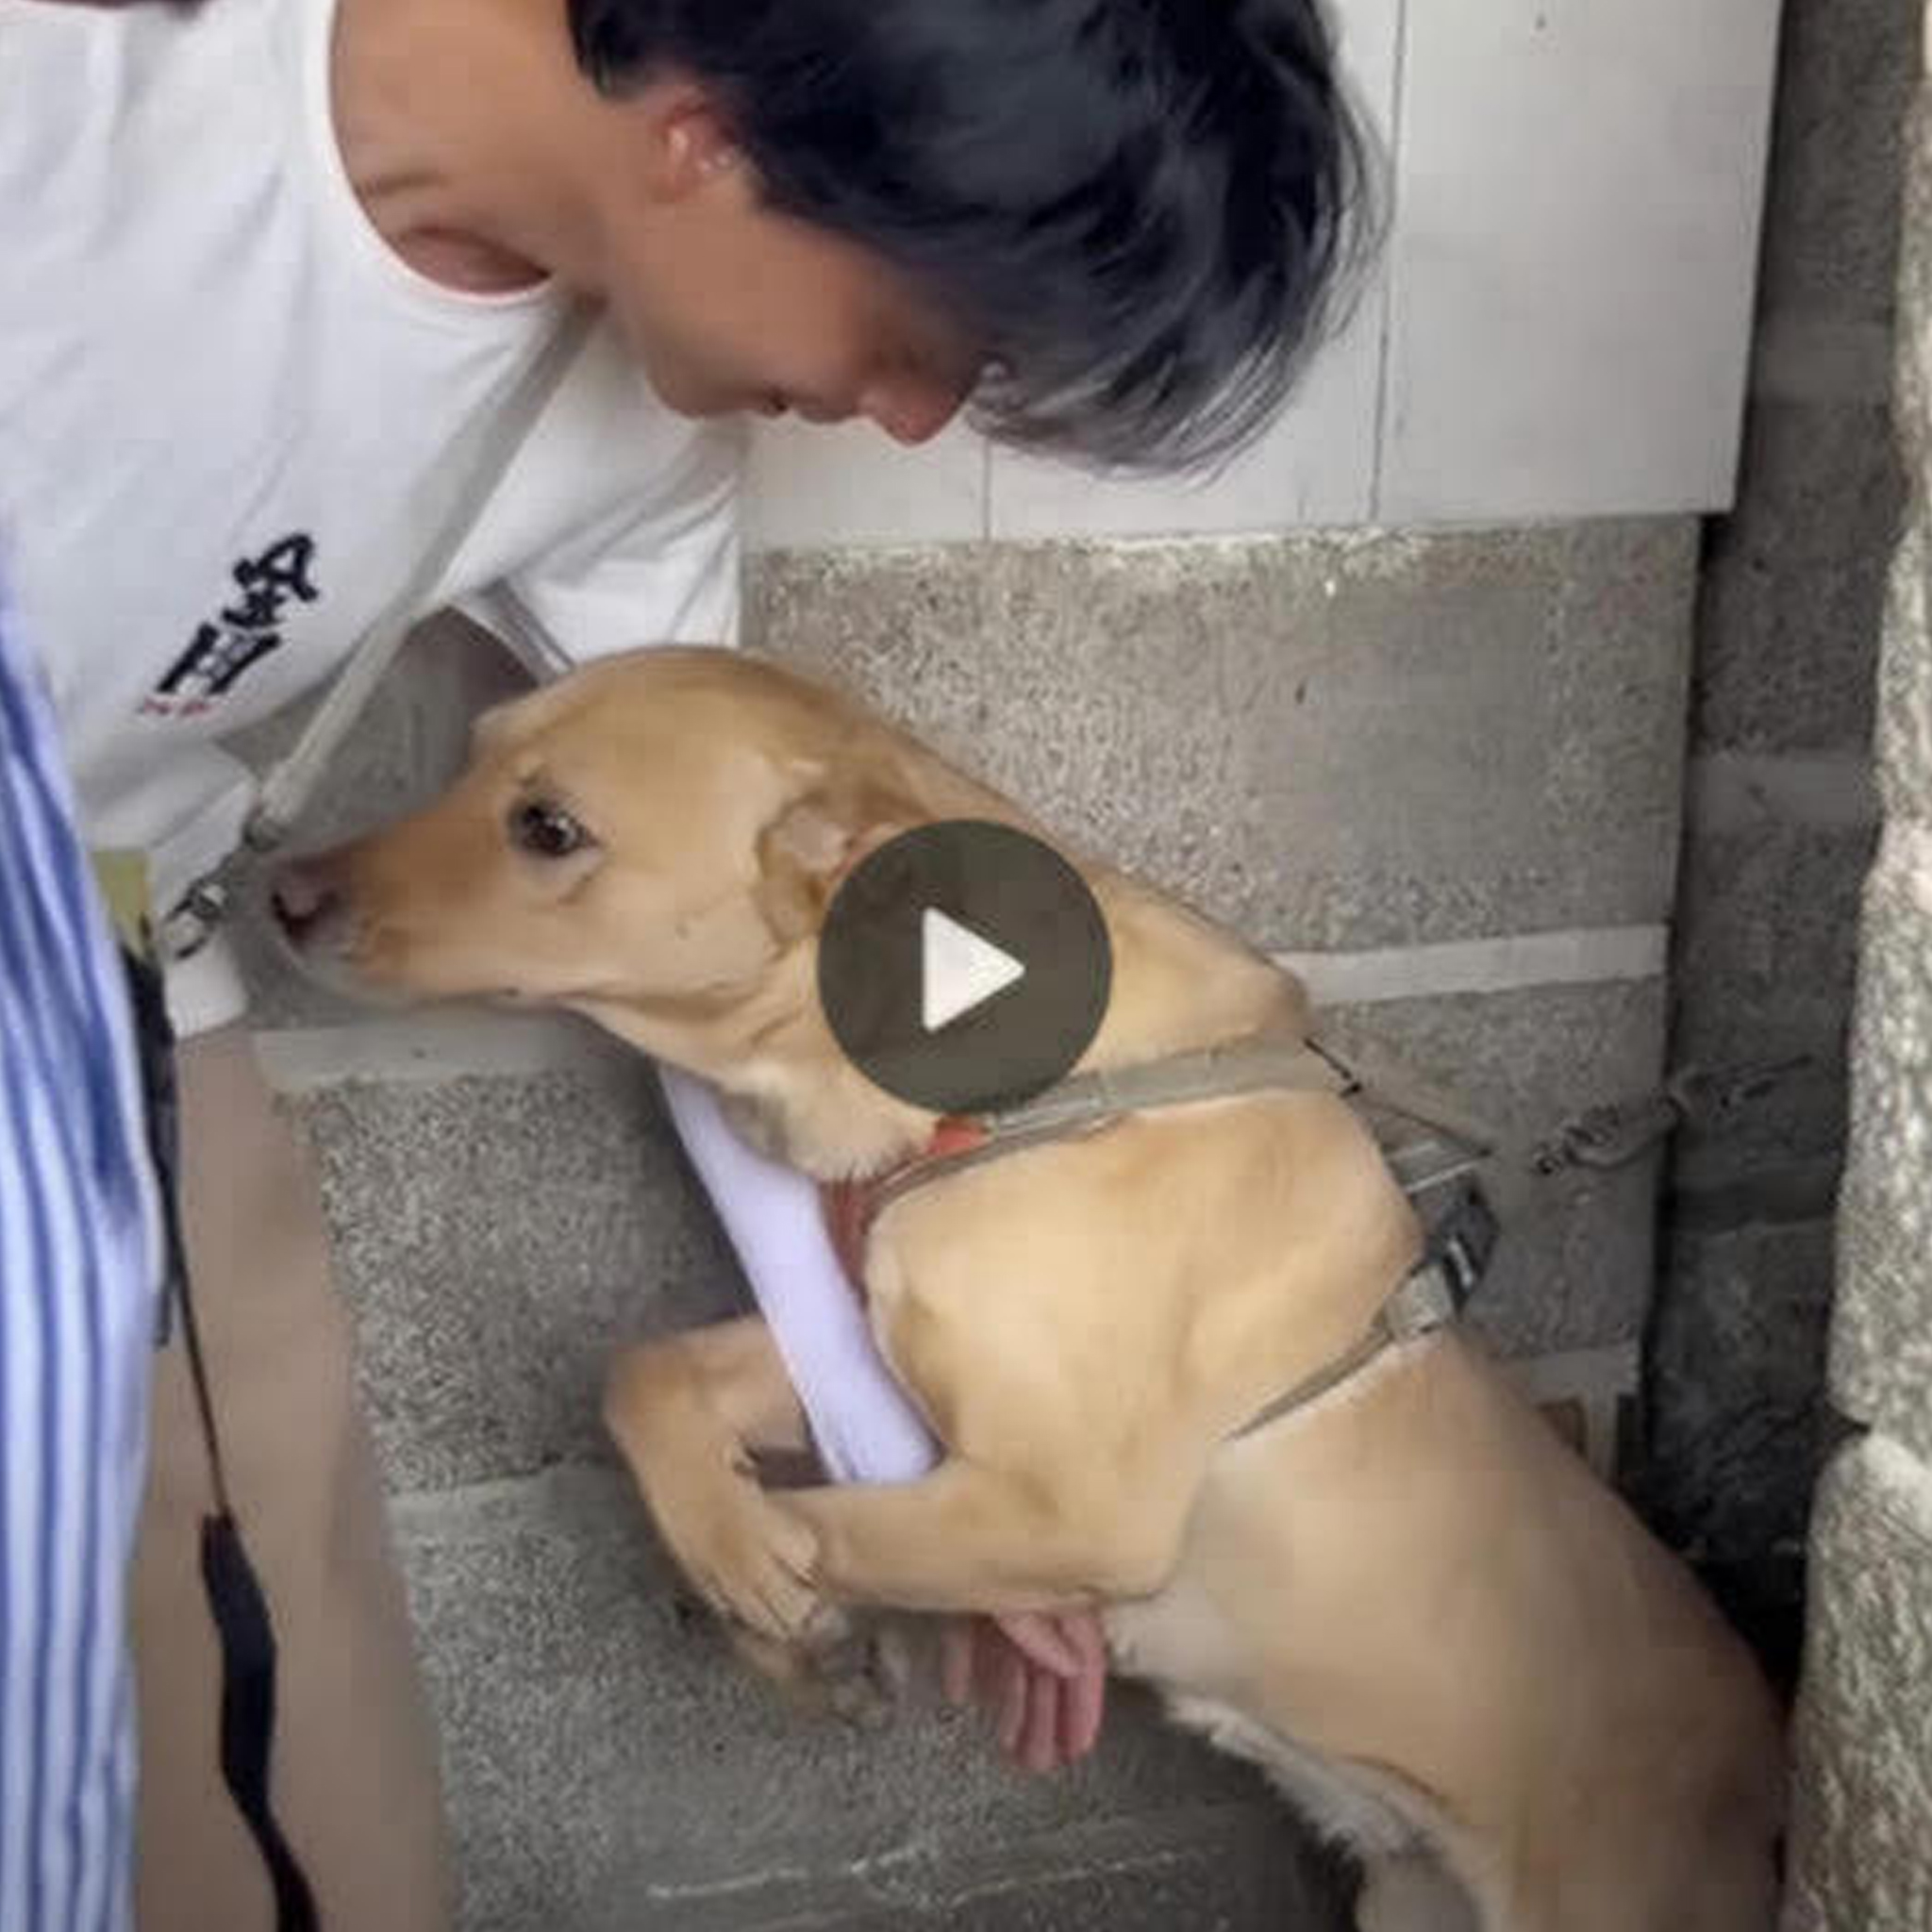 Heartbreaking Plea: Desperate Dog Clings to Passerby, Begging Not to Be Left Behind.